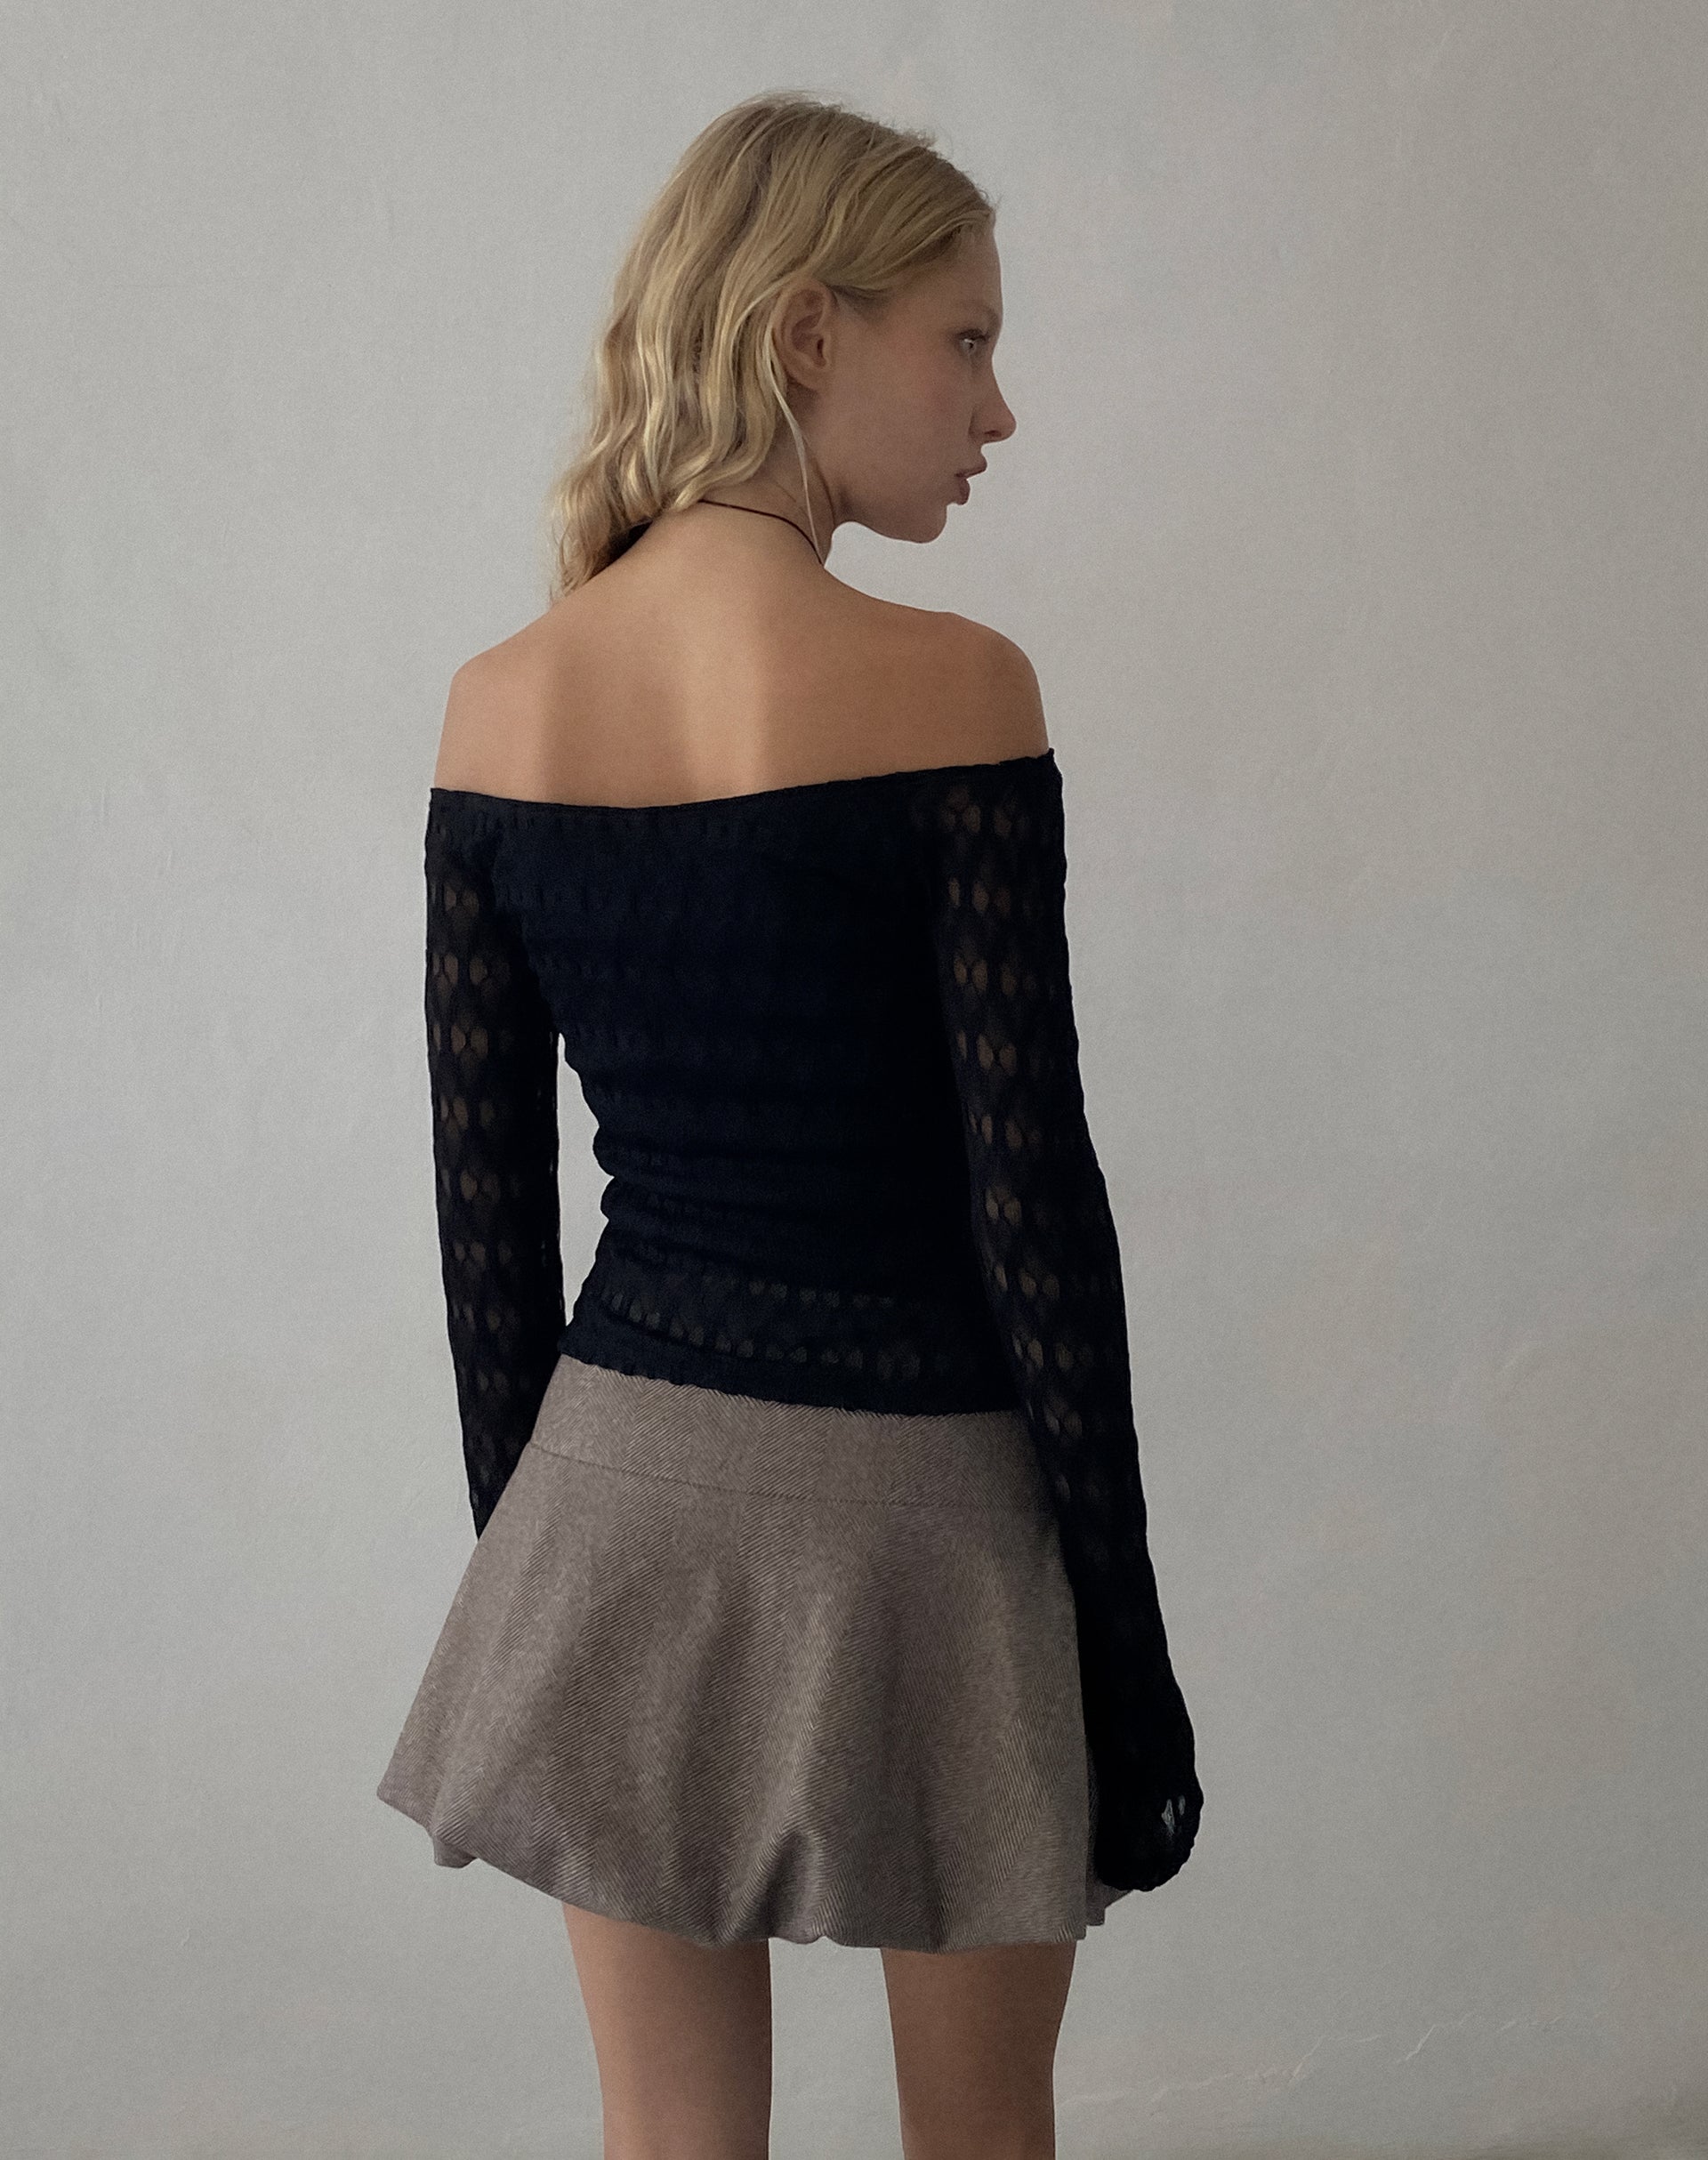 Image of Neira Long Sleeve Bardot Top in Textured Knit Black